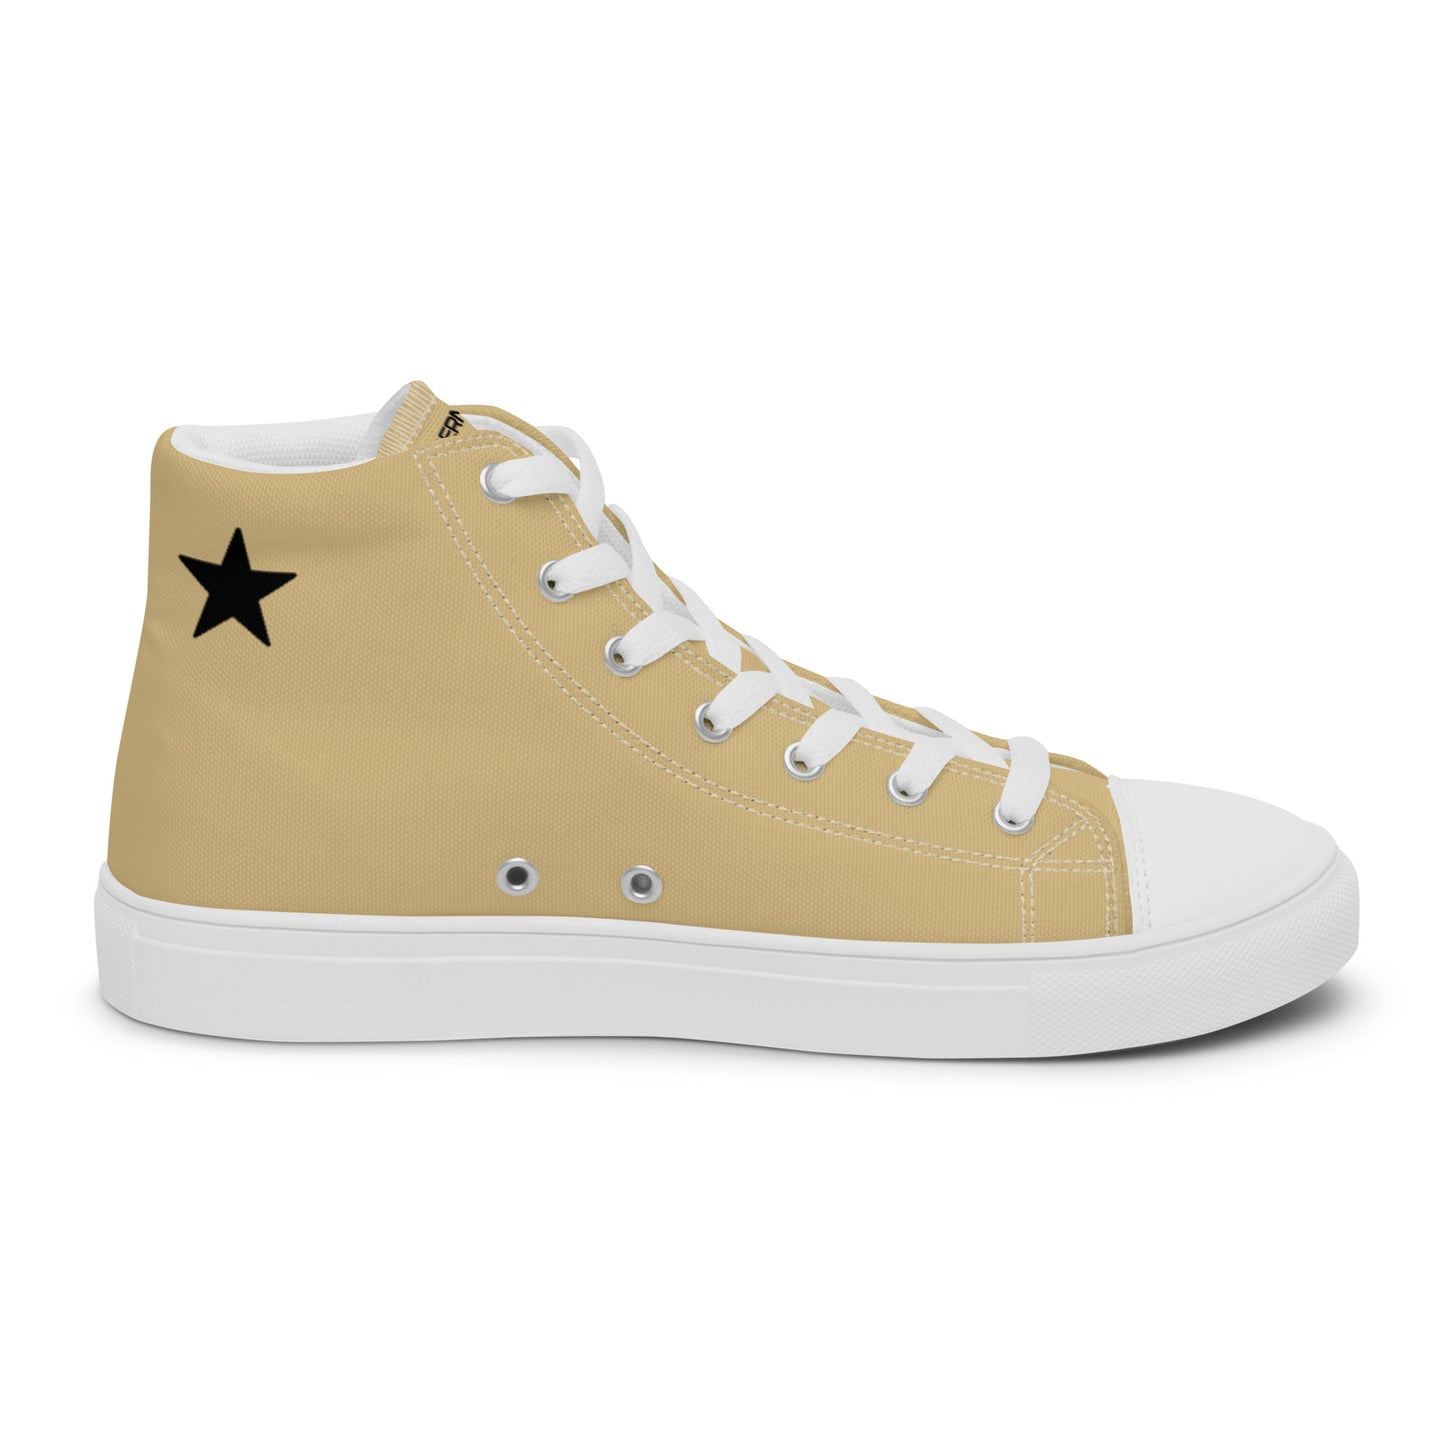 Men’s high top canvas shoes Solid10